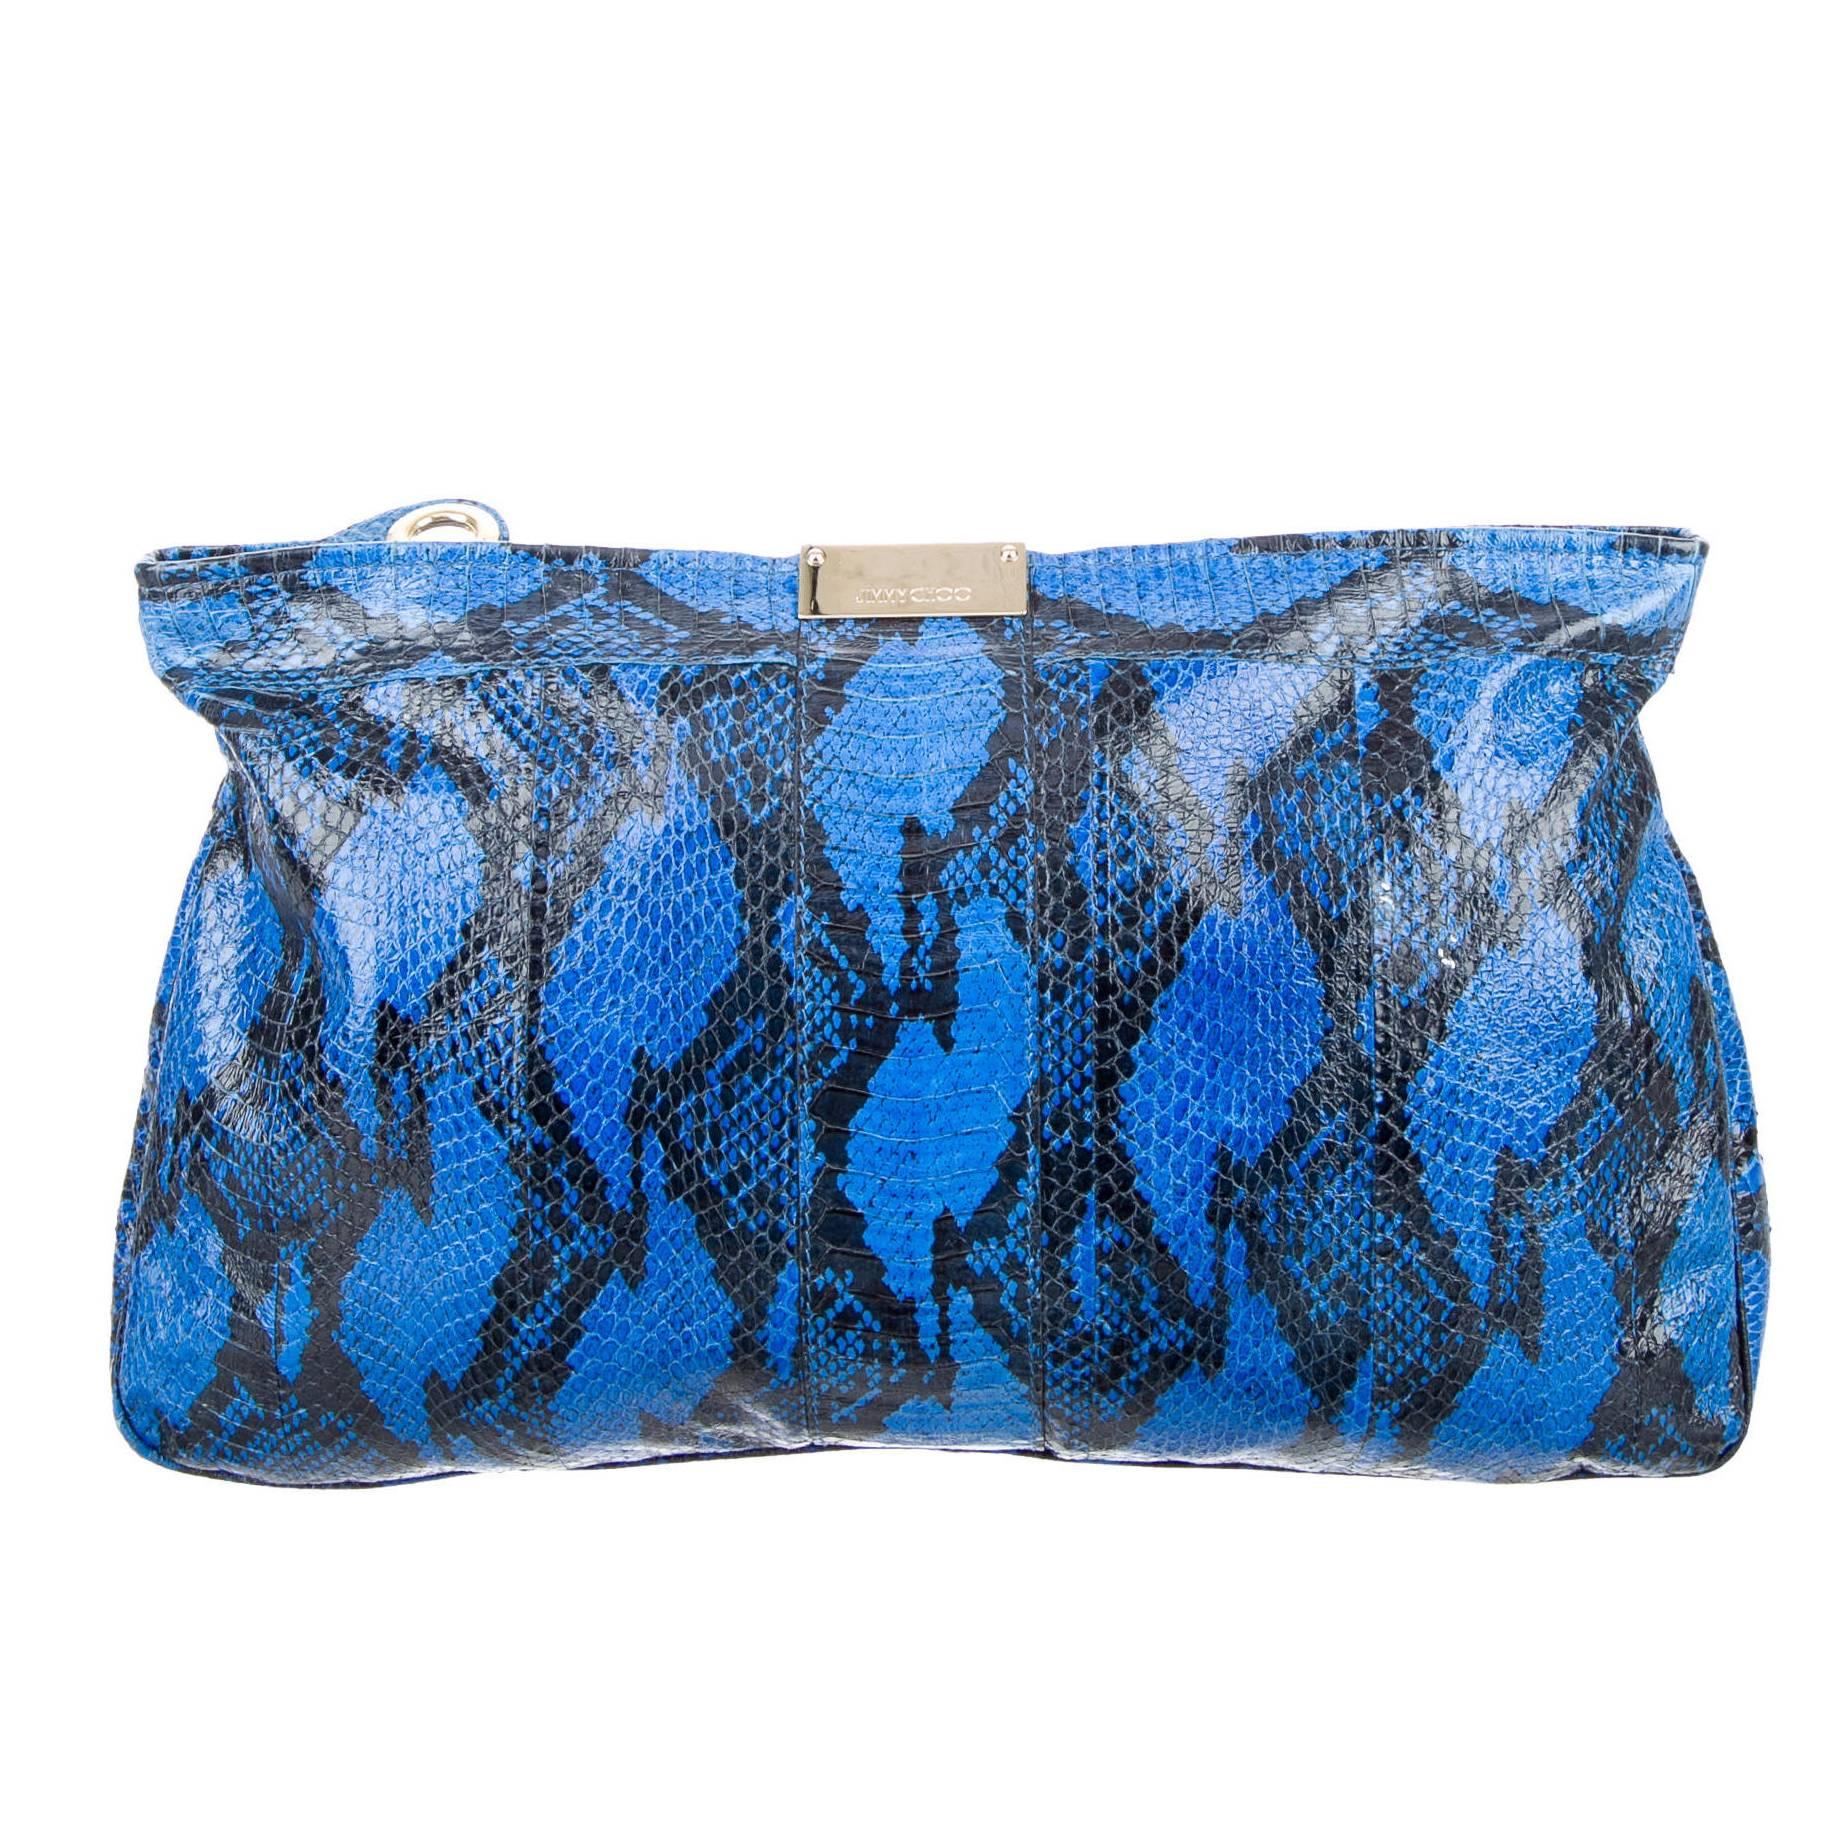 Jimmy Choo Electric Blue Black Snake Leather Envelope Pouch Clutch Bag